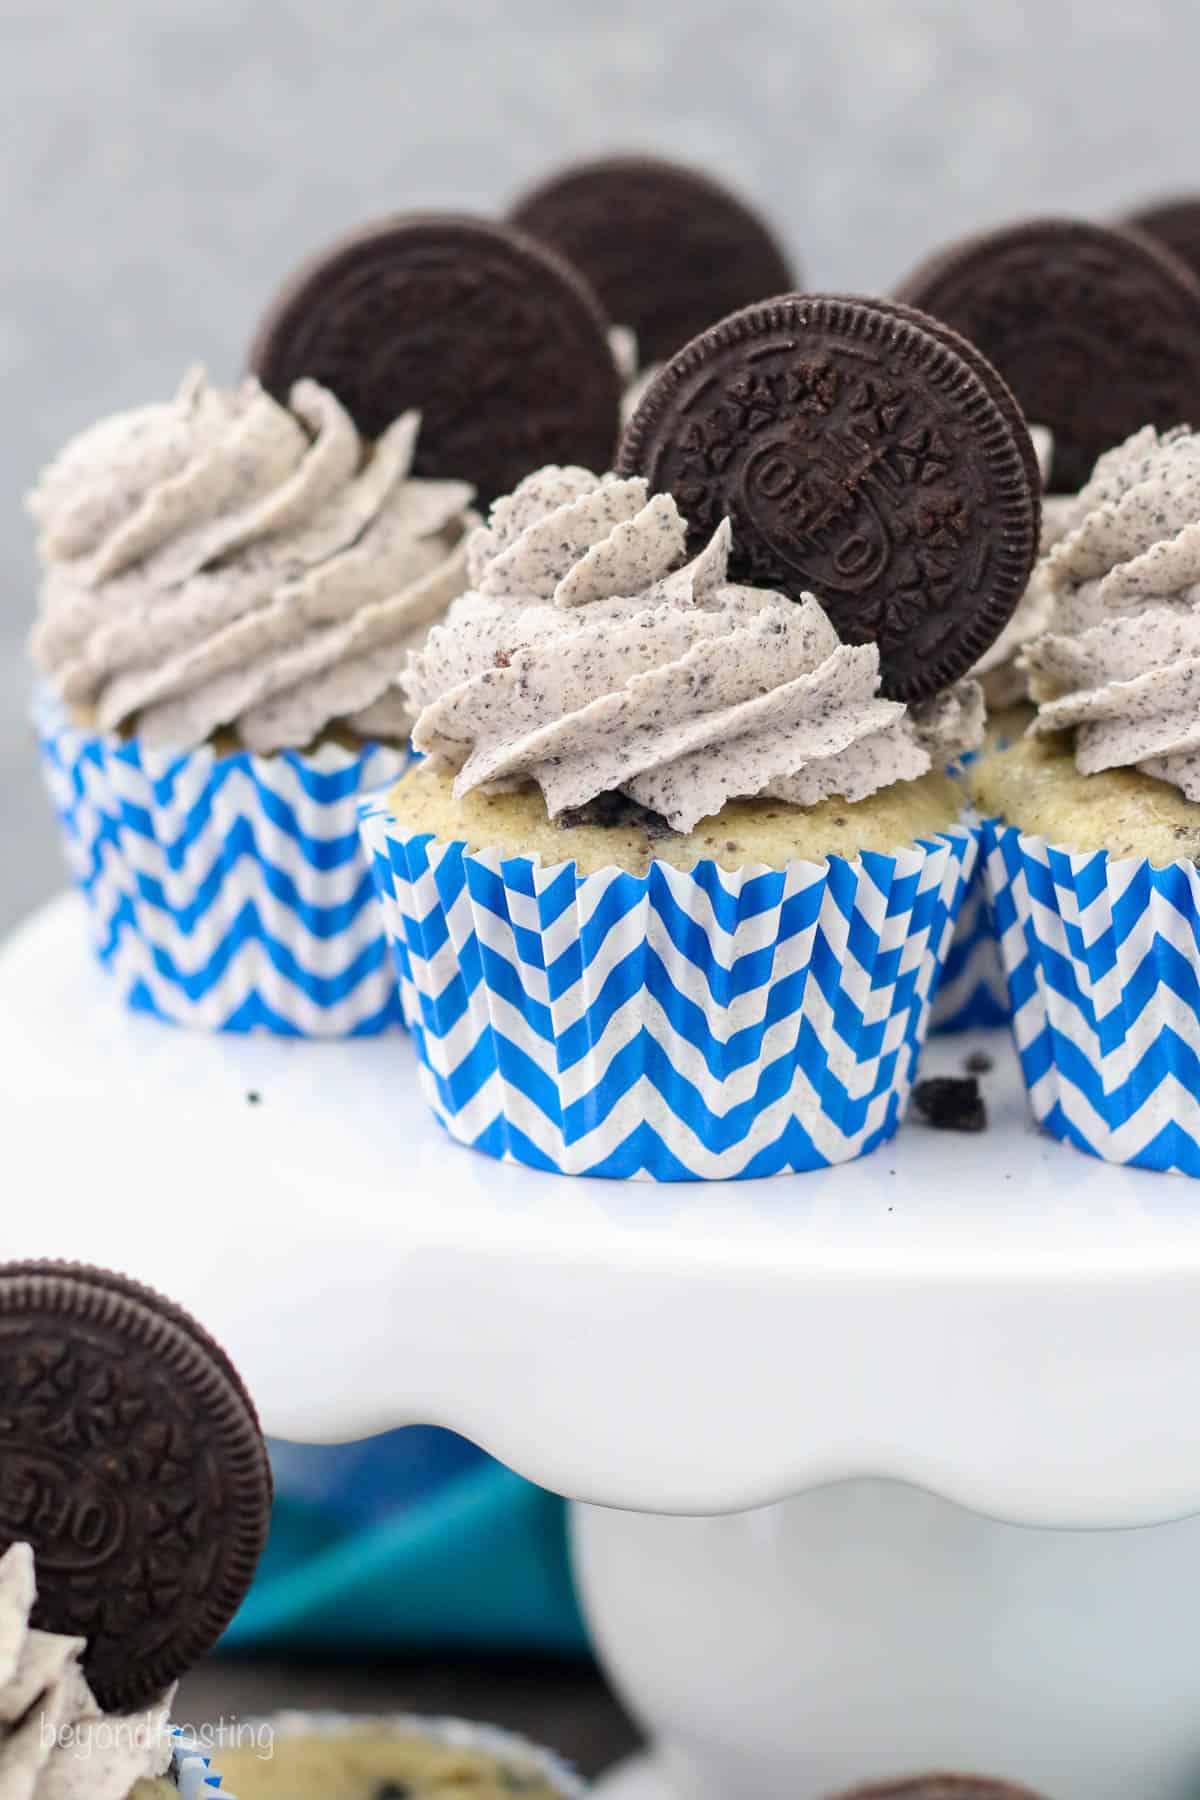 Frosted cookies and cream Oreo cupcakes in white and blue cupcake liners on a white cake stand.